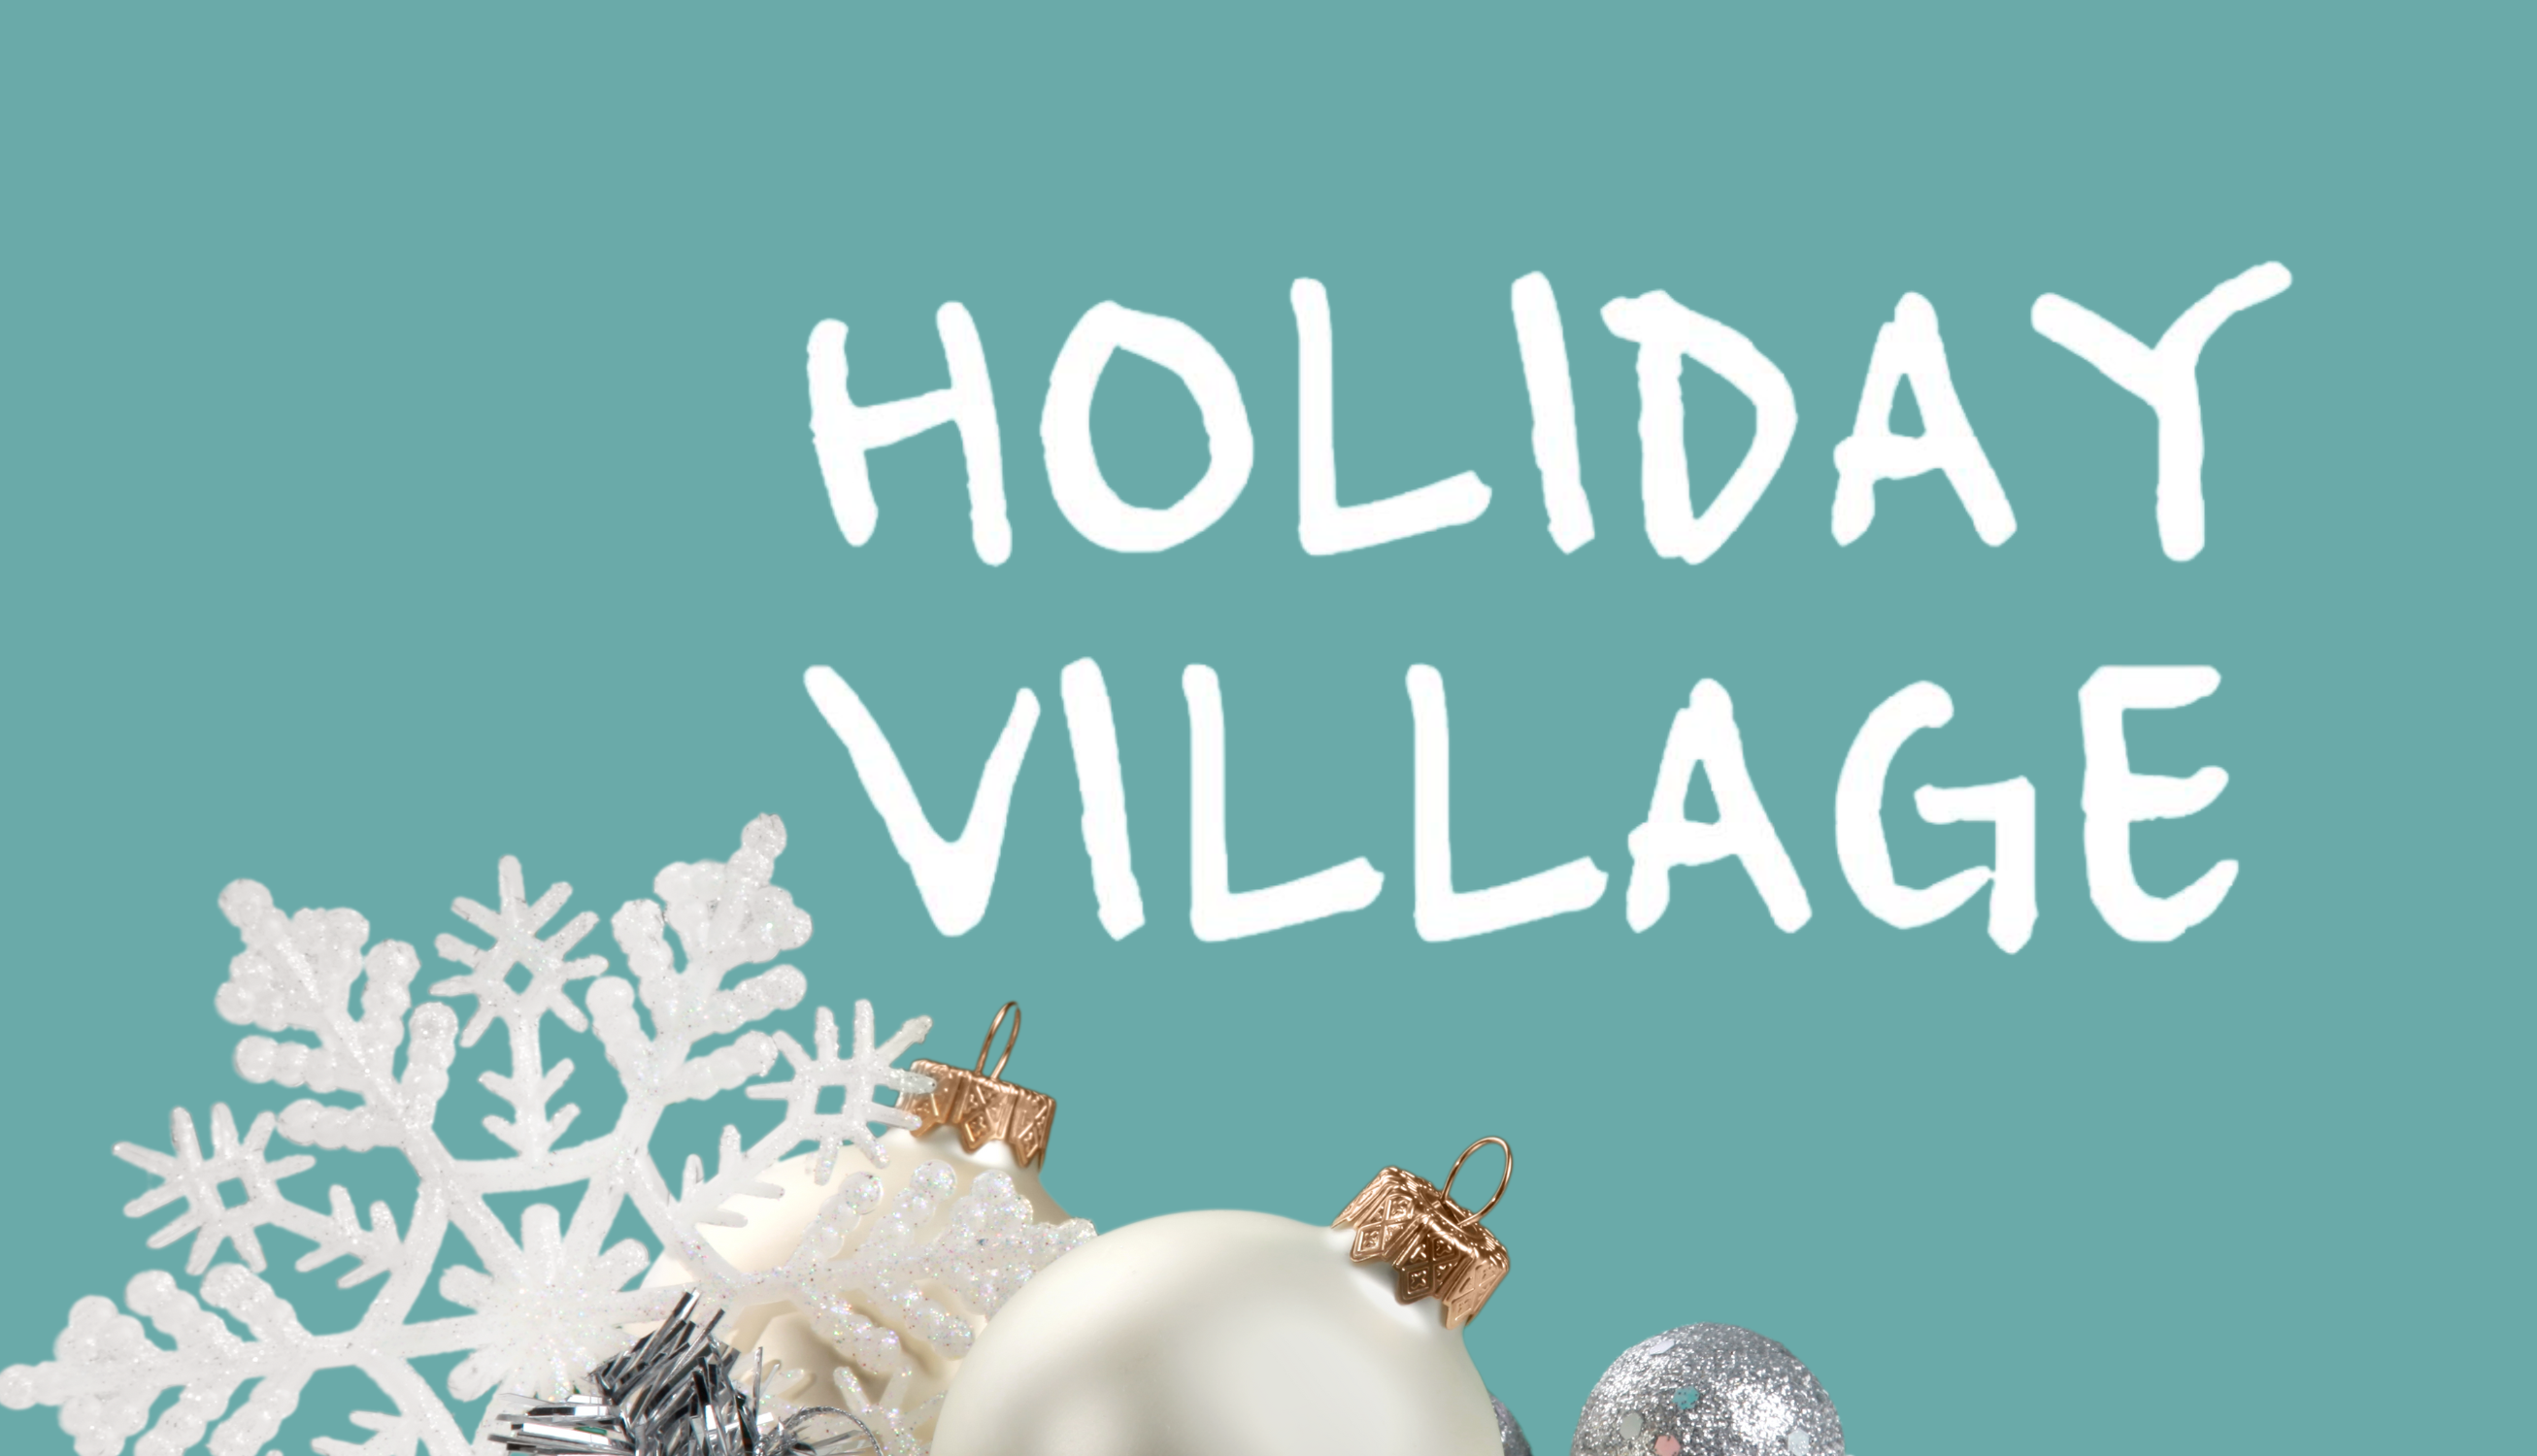 Upper Merion Township’s annual Holiday Village event is scheduled for Saturday, December 3